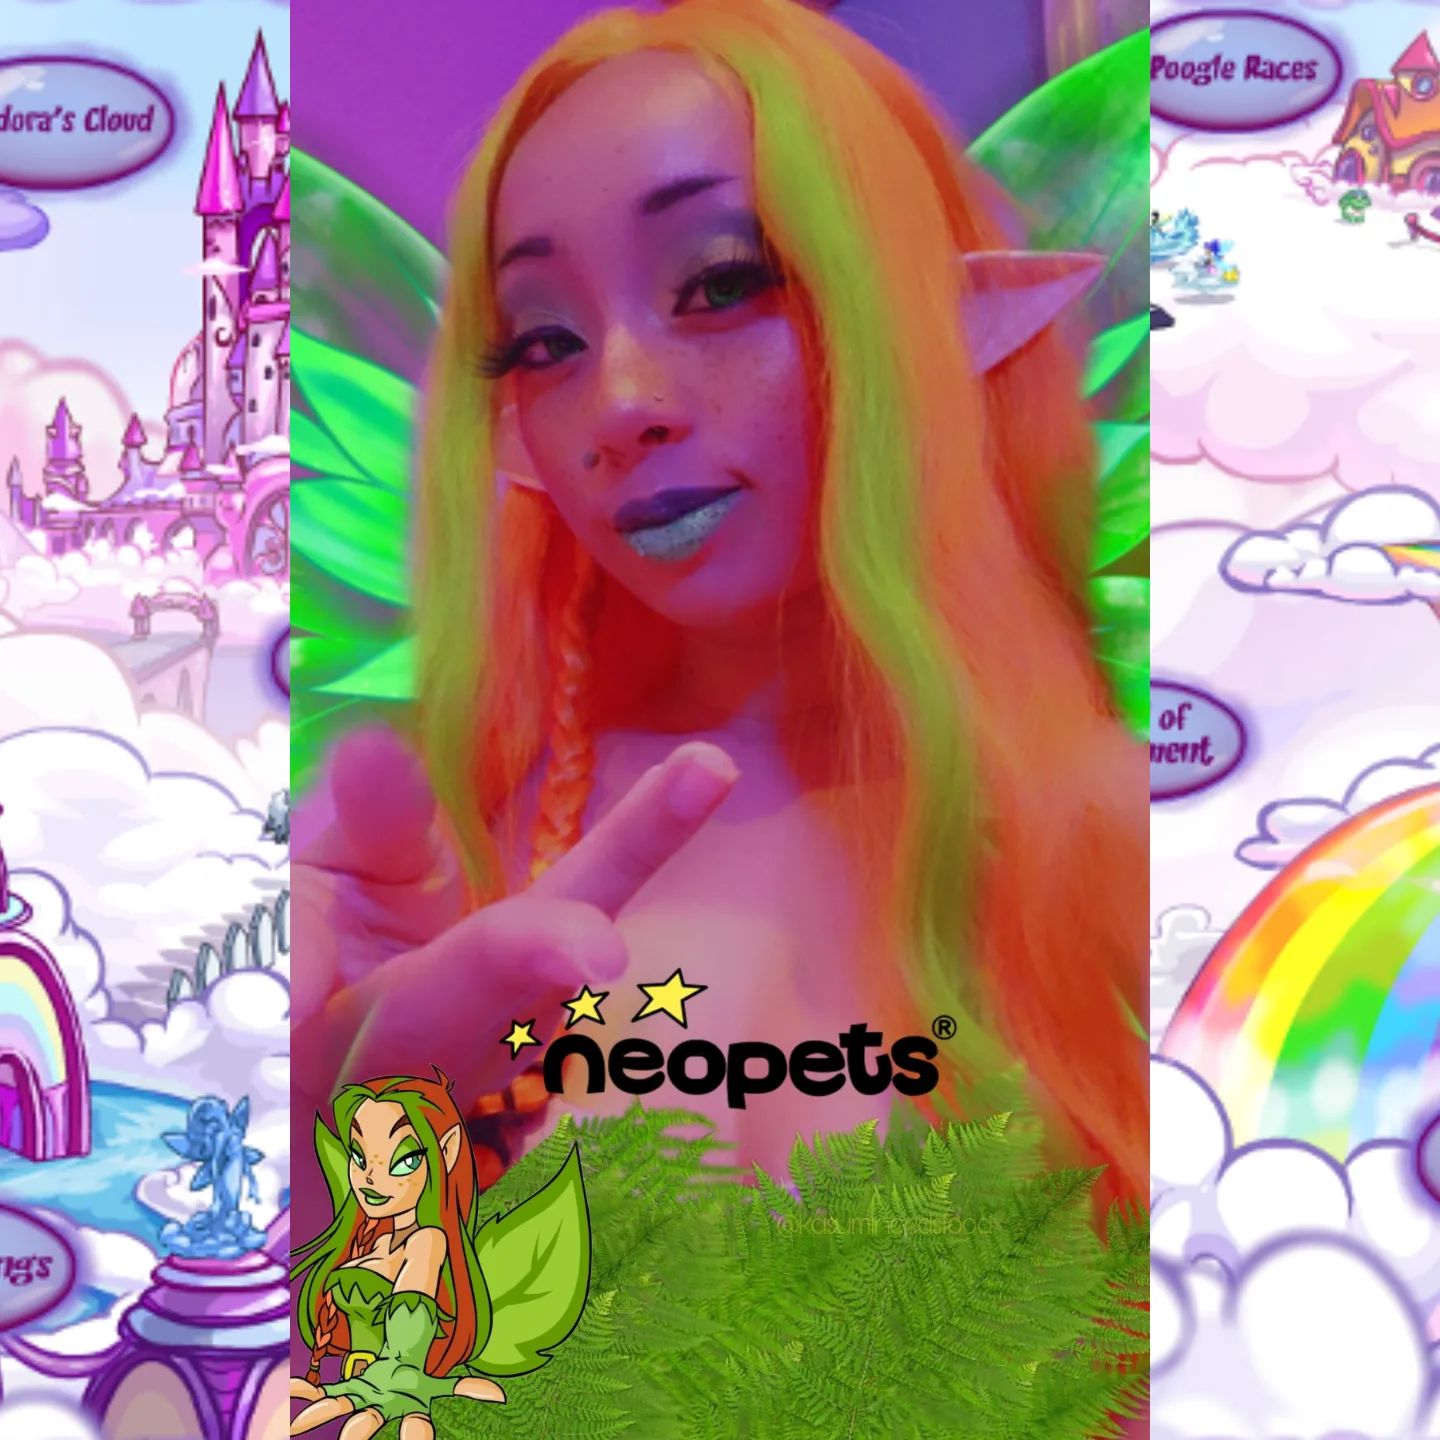 HAPPY ILLUSEN DAYYYYY 🌿🍀🍃

If @neopetsofficialaccount didn't post about it on twitter I would have never made it back here in time 😂💀💐 and I know Jhudora would have just LOVED that😈 !!!

Did yall know neopets has a website again? I got the special 2024 monthly calendar at @comicconla in December when I guested with @technisport !! (Use KASUMINEE to bundle for your gear / set up) 

I'm slick getting back into playing Neopets and I'm looking for other faerie friends 😅

Do you remember the name of your favorite mini game from the old neopets site?

I have so much new stuff otw for you all and I want to say thank you for being patient and sticking by me. I hope all your dreams come true fr 🥹

🌿
🍀
🌿
🍀
🌿
🍀
🌿

Silly lil tags that idk if they work or not 
#neopets #cosplay #illusen #faerie #faerieland #illusencosplay #blackcosplayer #egirl #online #gamergirl #streamer #videogames #webgaming #fairy #illusenday #jhudora #throwback #closetcosplay #selca #selfie #makeup